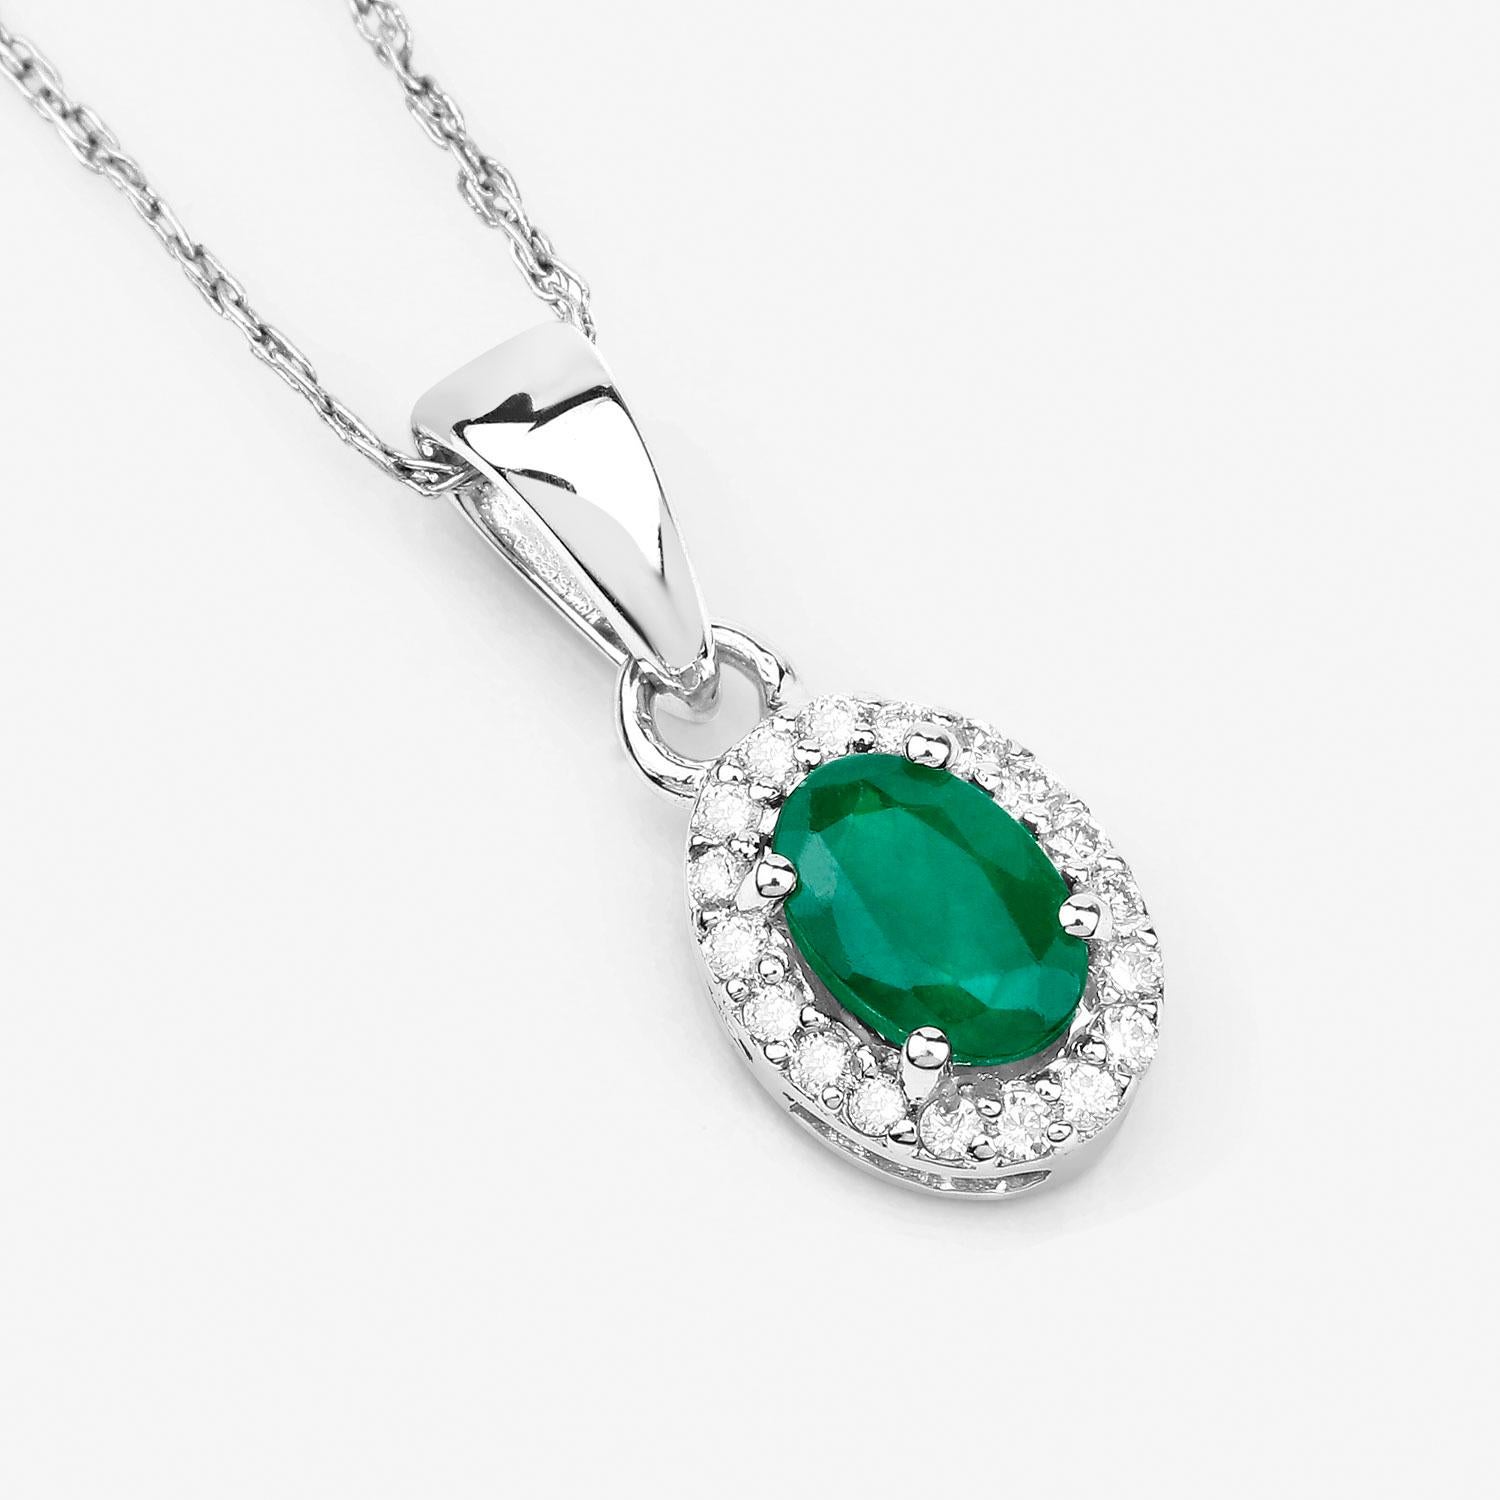 Oval Cut Zambian Emerald Pendant Necklace With Diamonds 0.81 Carats 14K White Gold For Sale